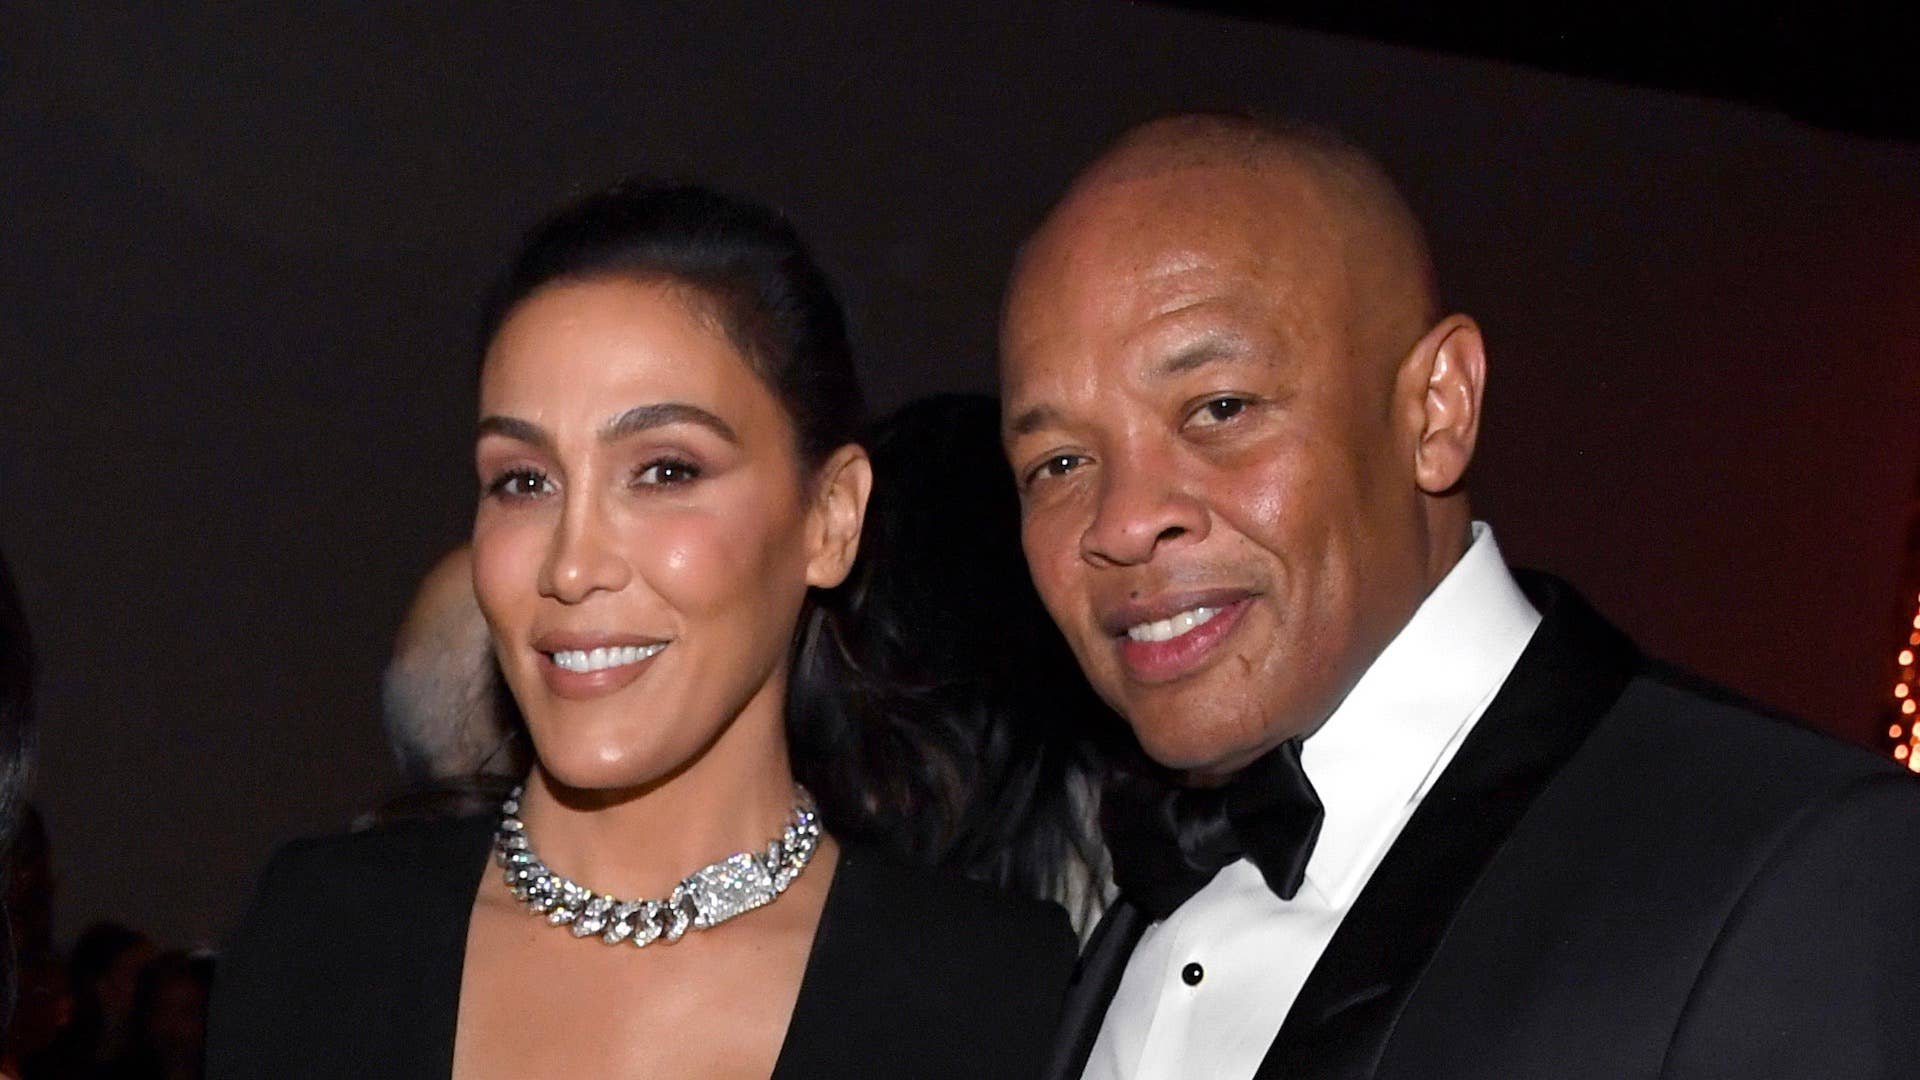 Nicole Young, and Dr. Dre attend Sean Combs 50th Birthday Bash